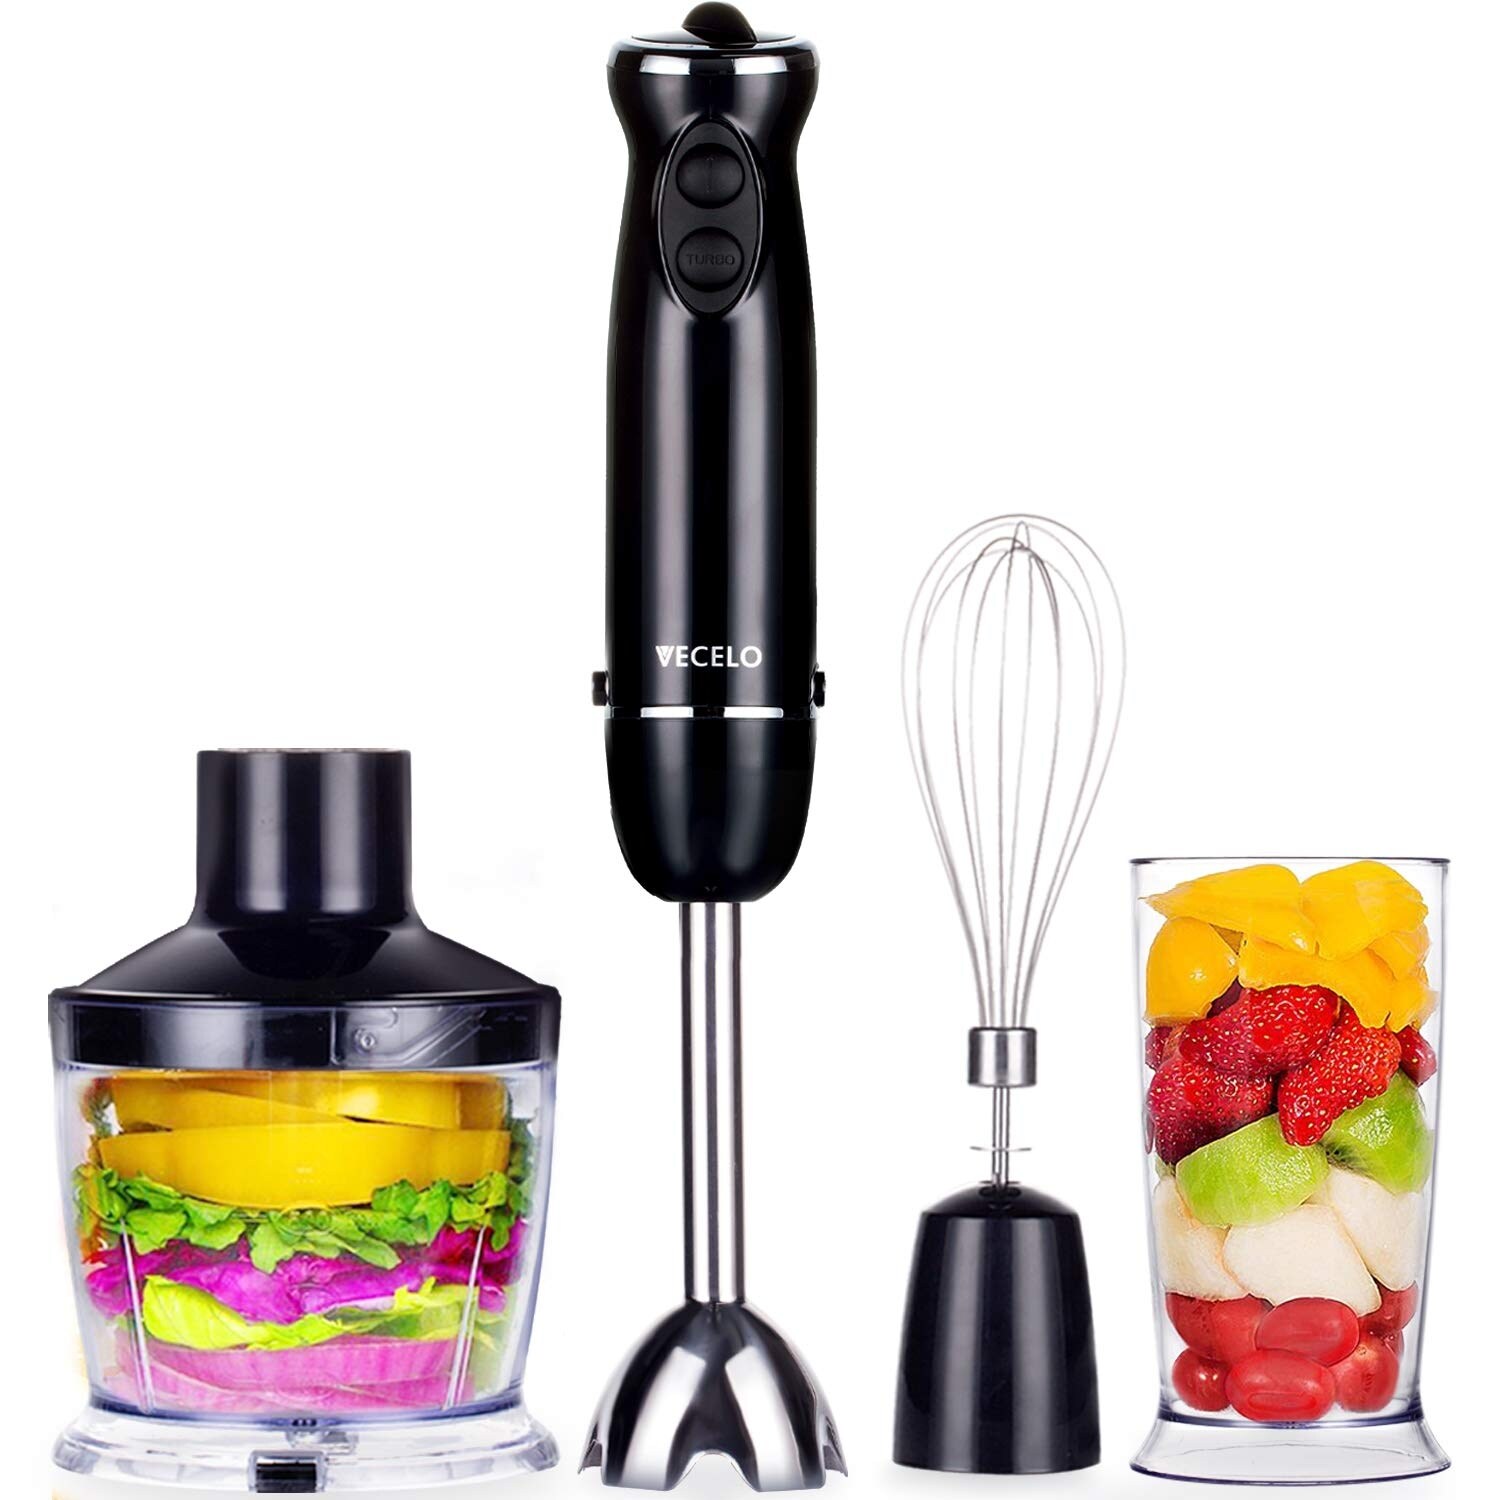 Classic Cuisine 6-Speed 4-in-1 Black Immersion Blender with